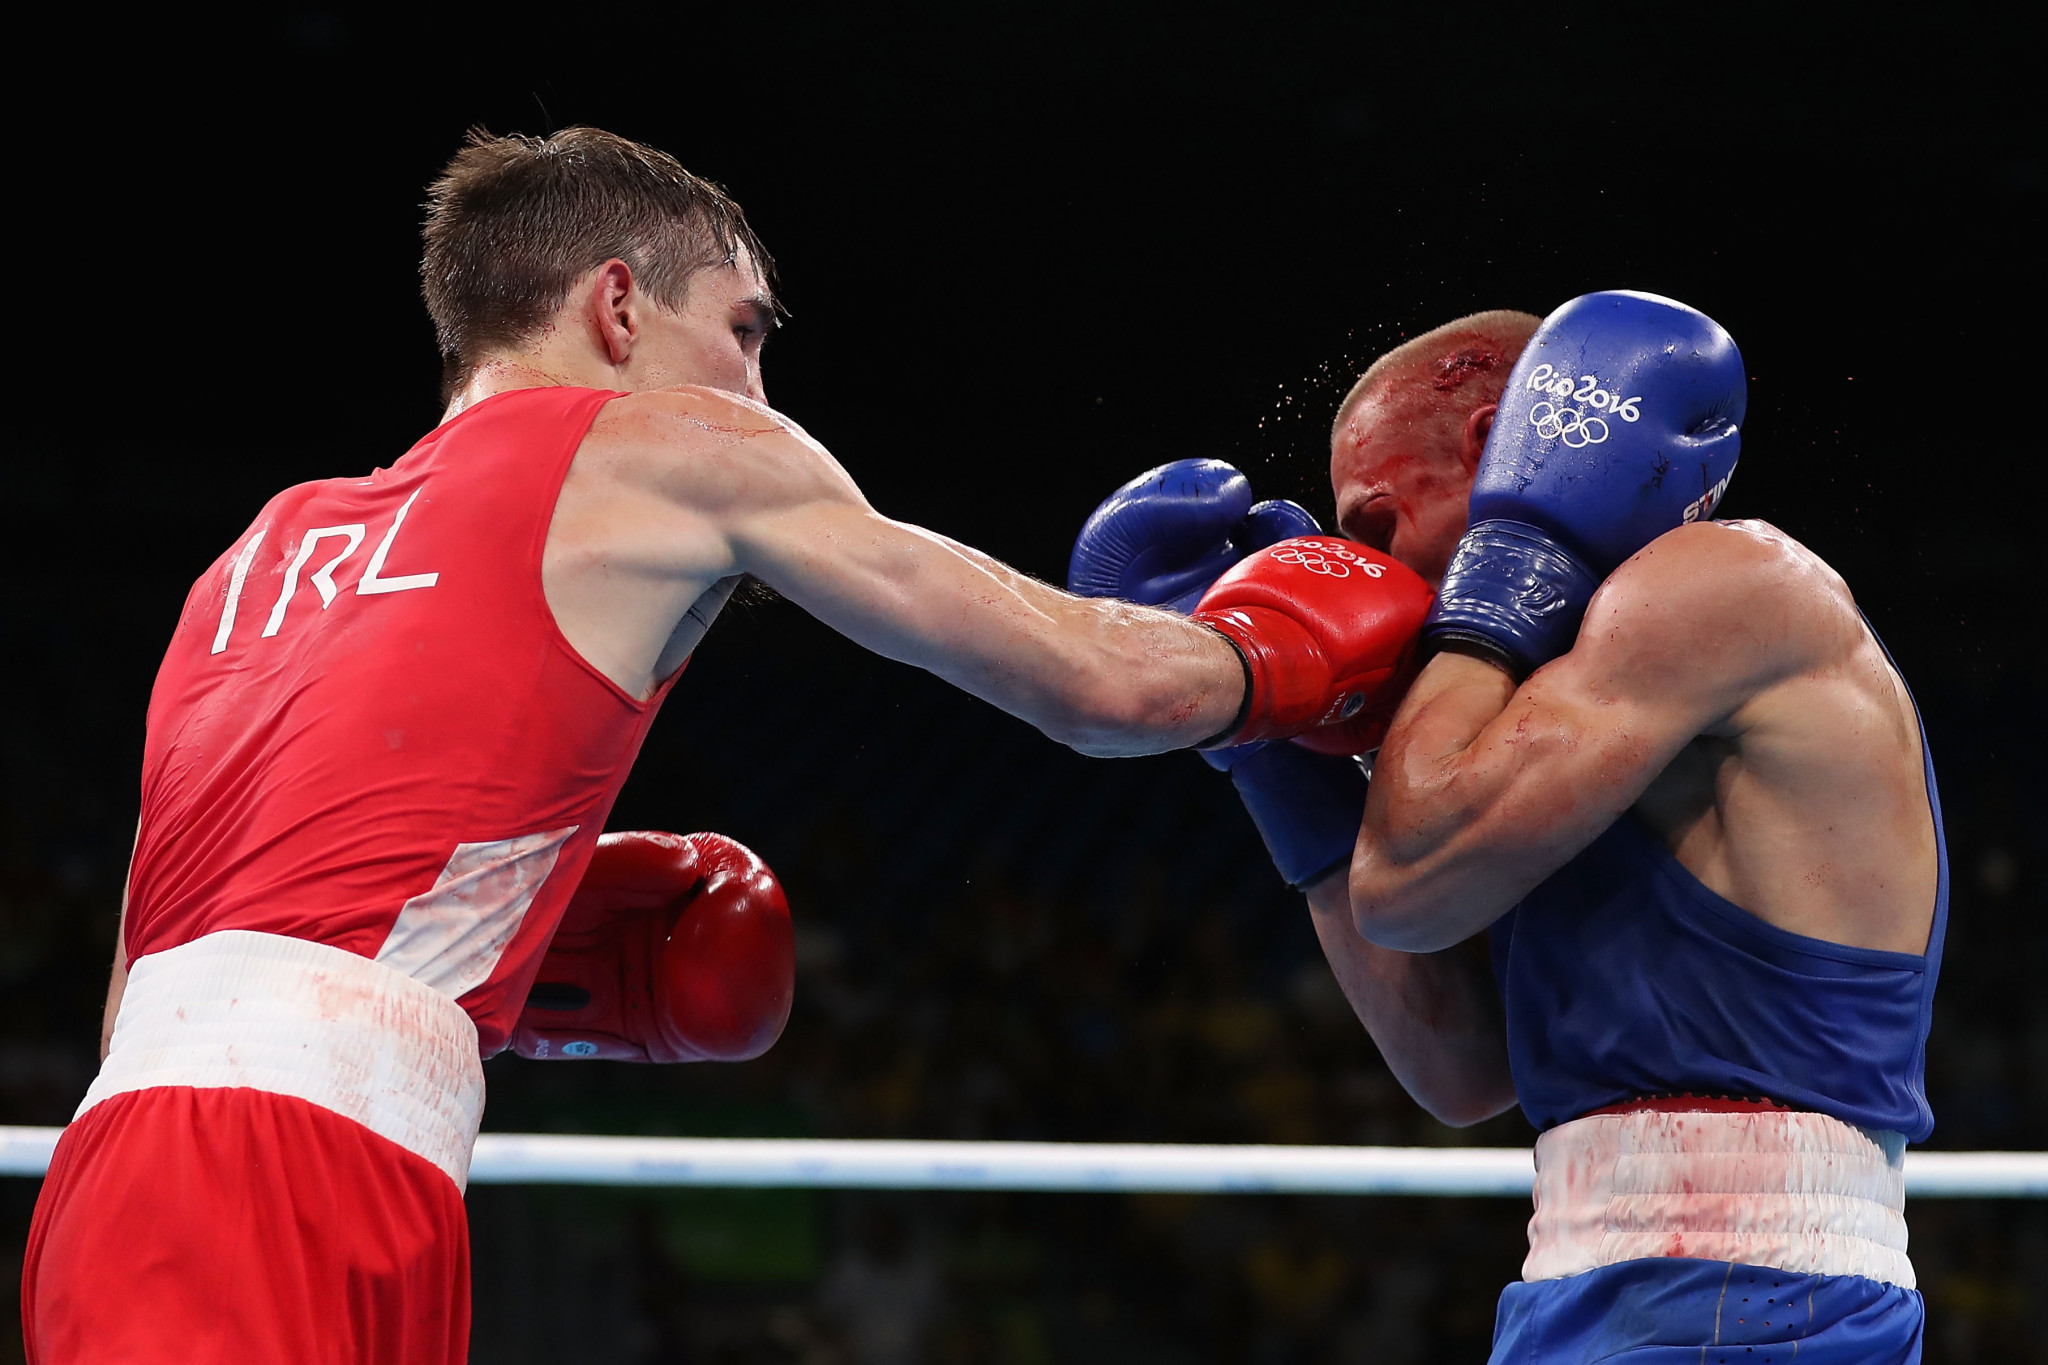 Ireland's Michael Conlan, left, was among boxers to suffer a controversial defeat at Rio 2016 ©Getty Images